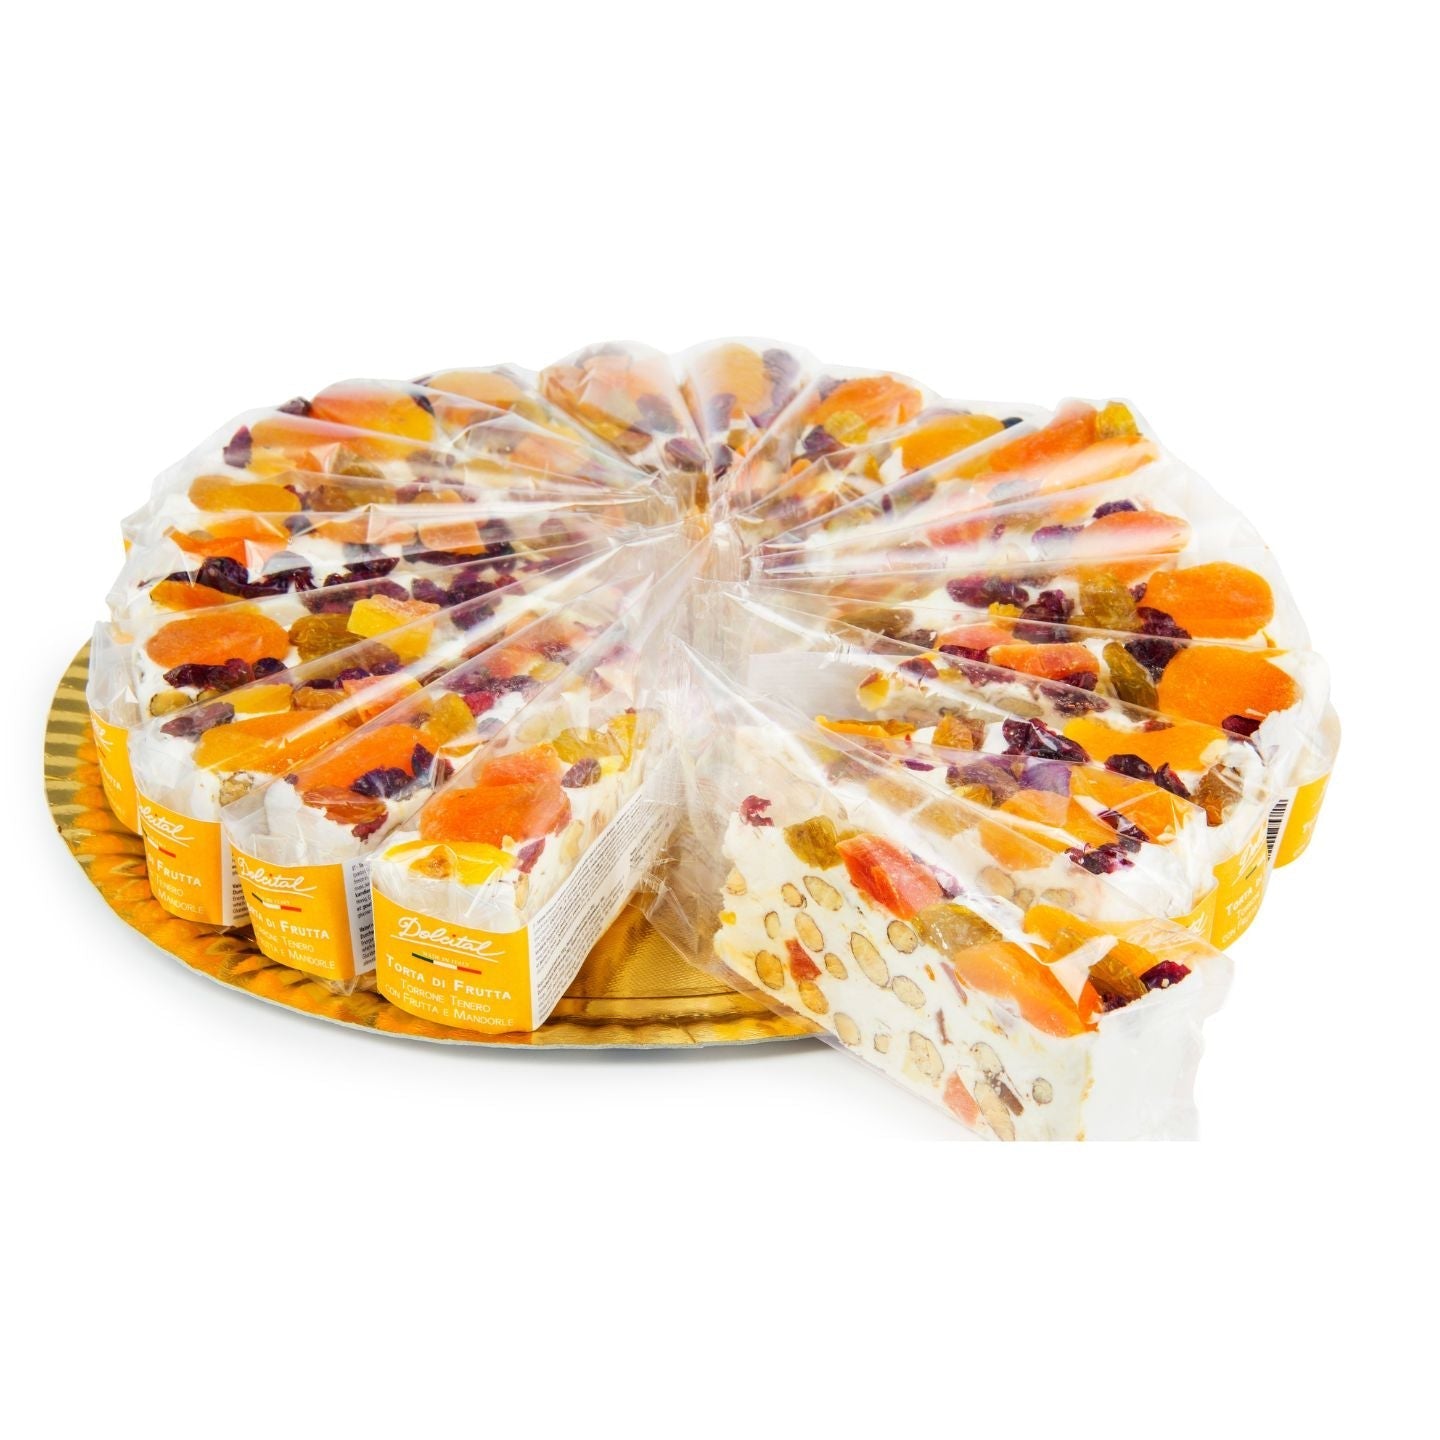 Dolcital Soft Nougat Cake Slice with Almonds & Fruit 110g Feast Italy